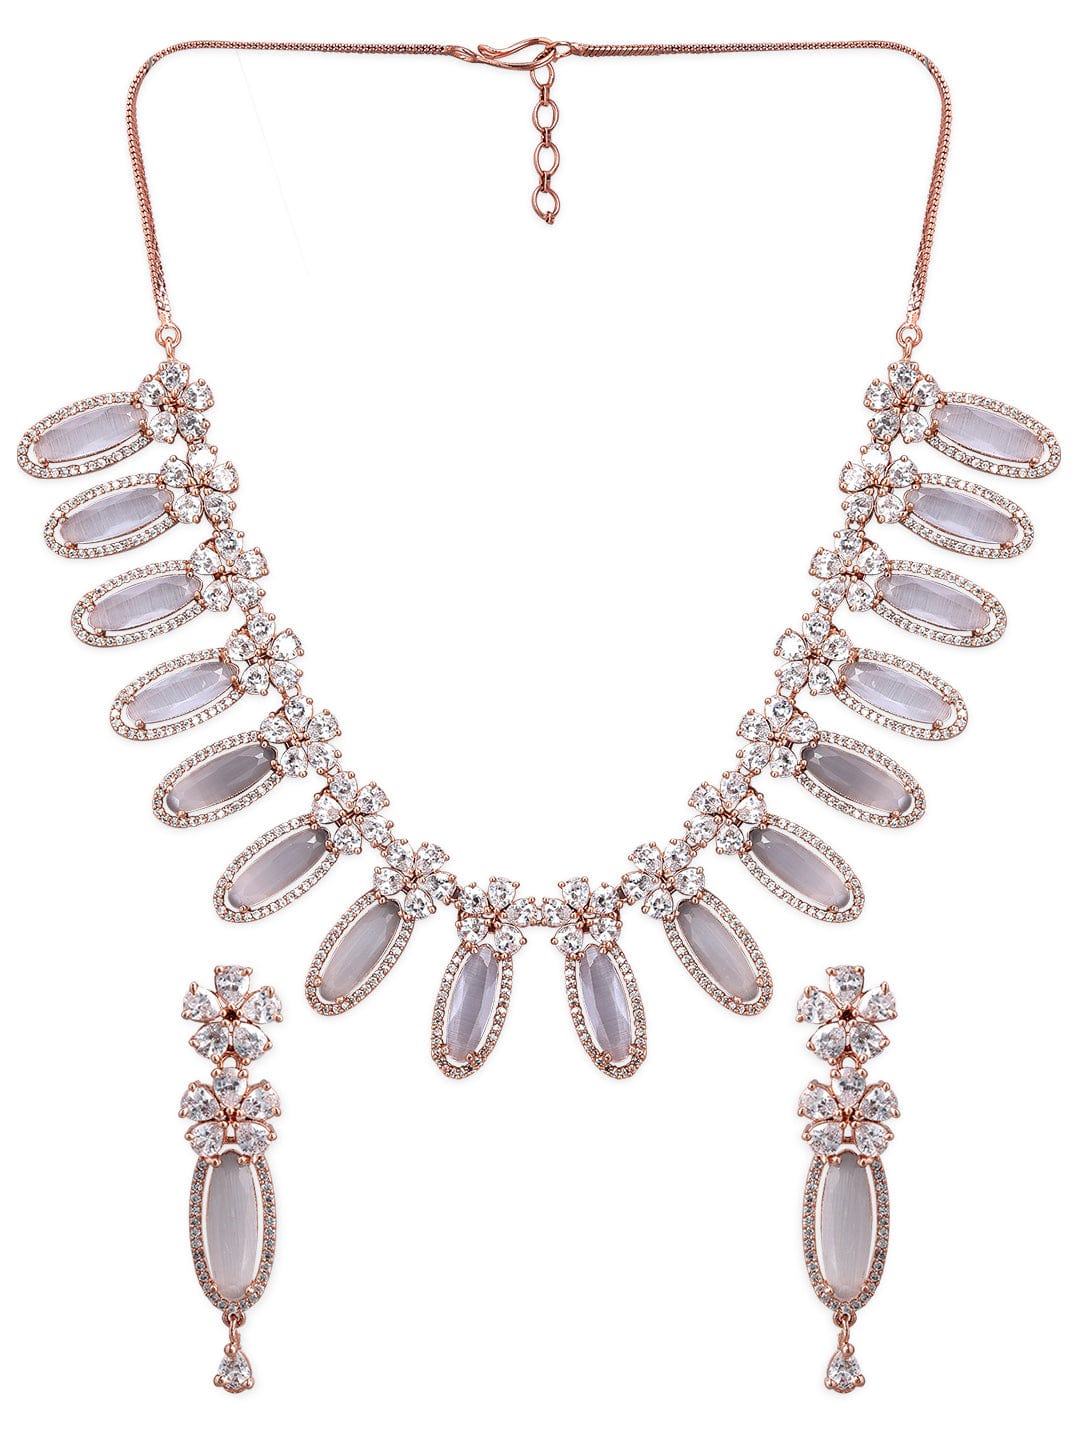 Rubans Rose Gold Plated White Beads American Diamond Necklace Set. Necklace Set